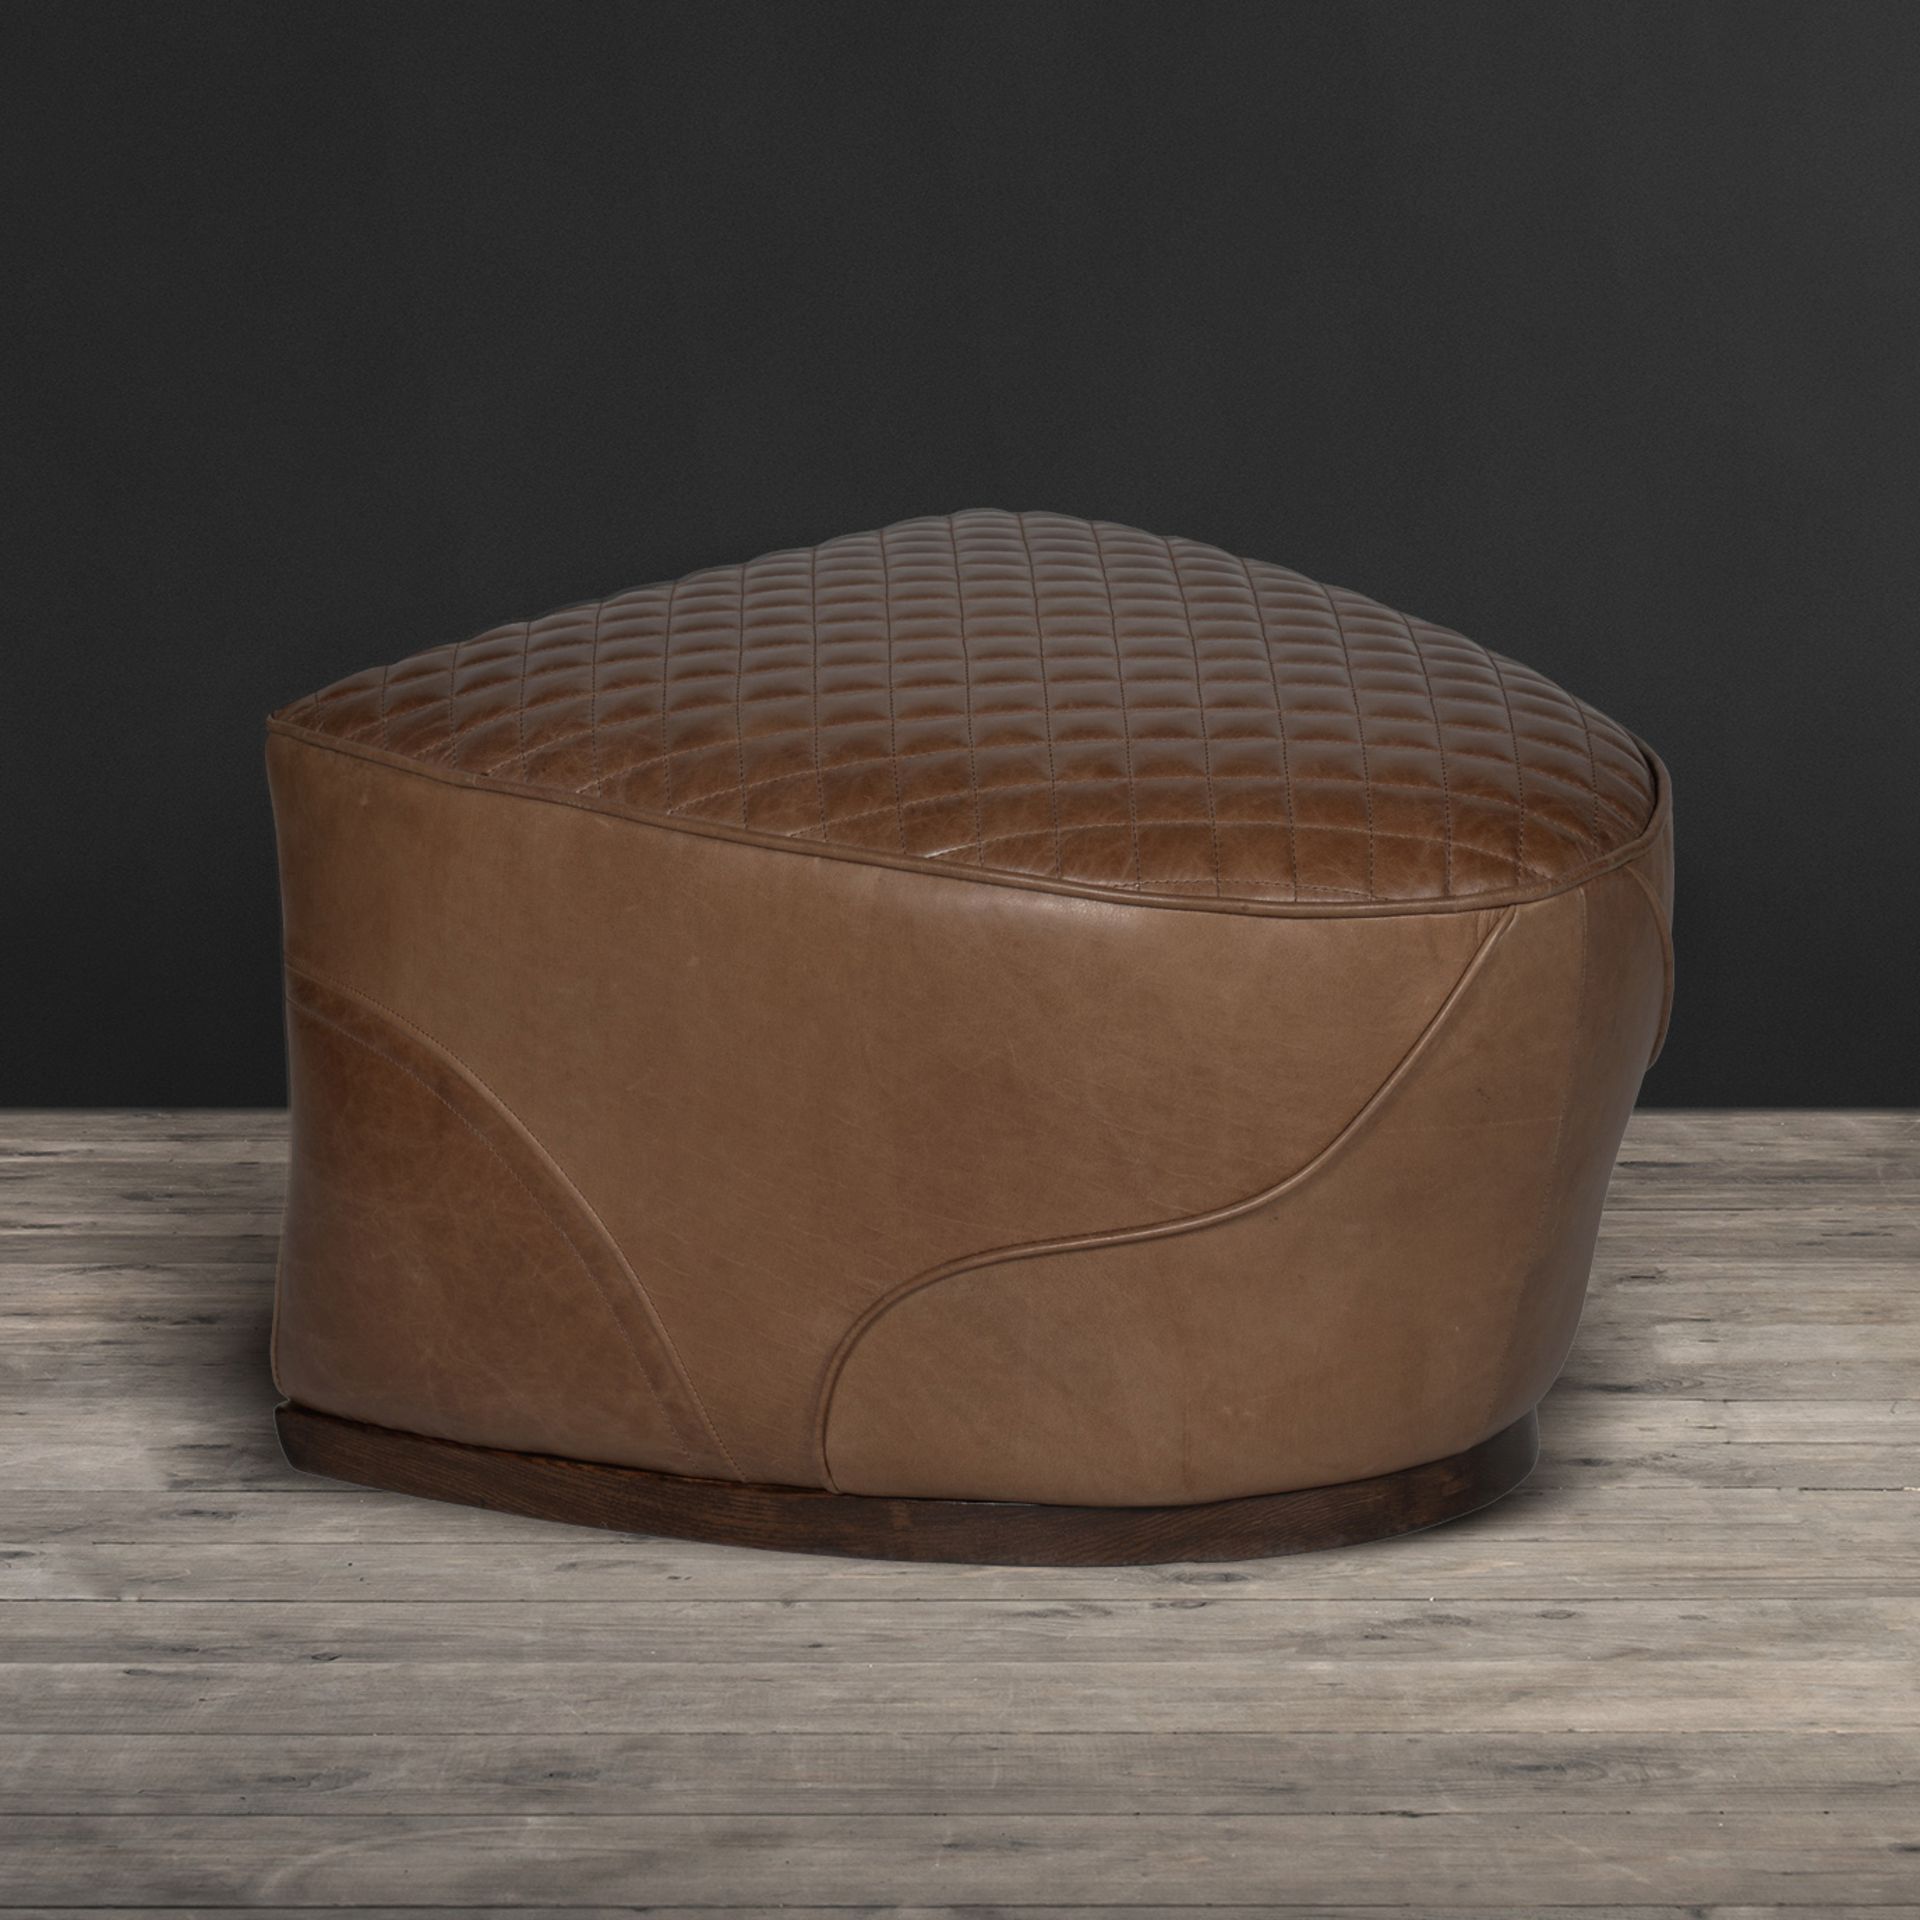 Saddle Footstool Bull Leather and Nubuck This Spectacular Timothy Oulton Saddle Footstool Is Made